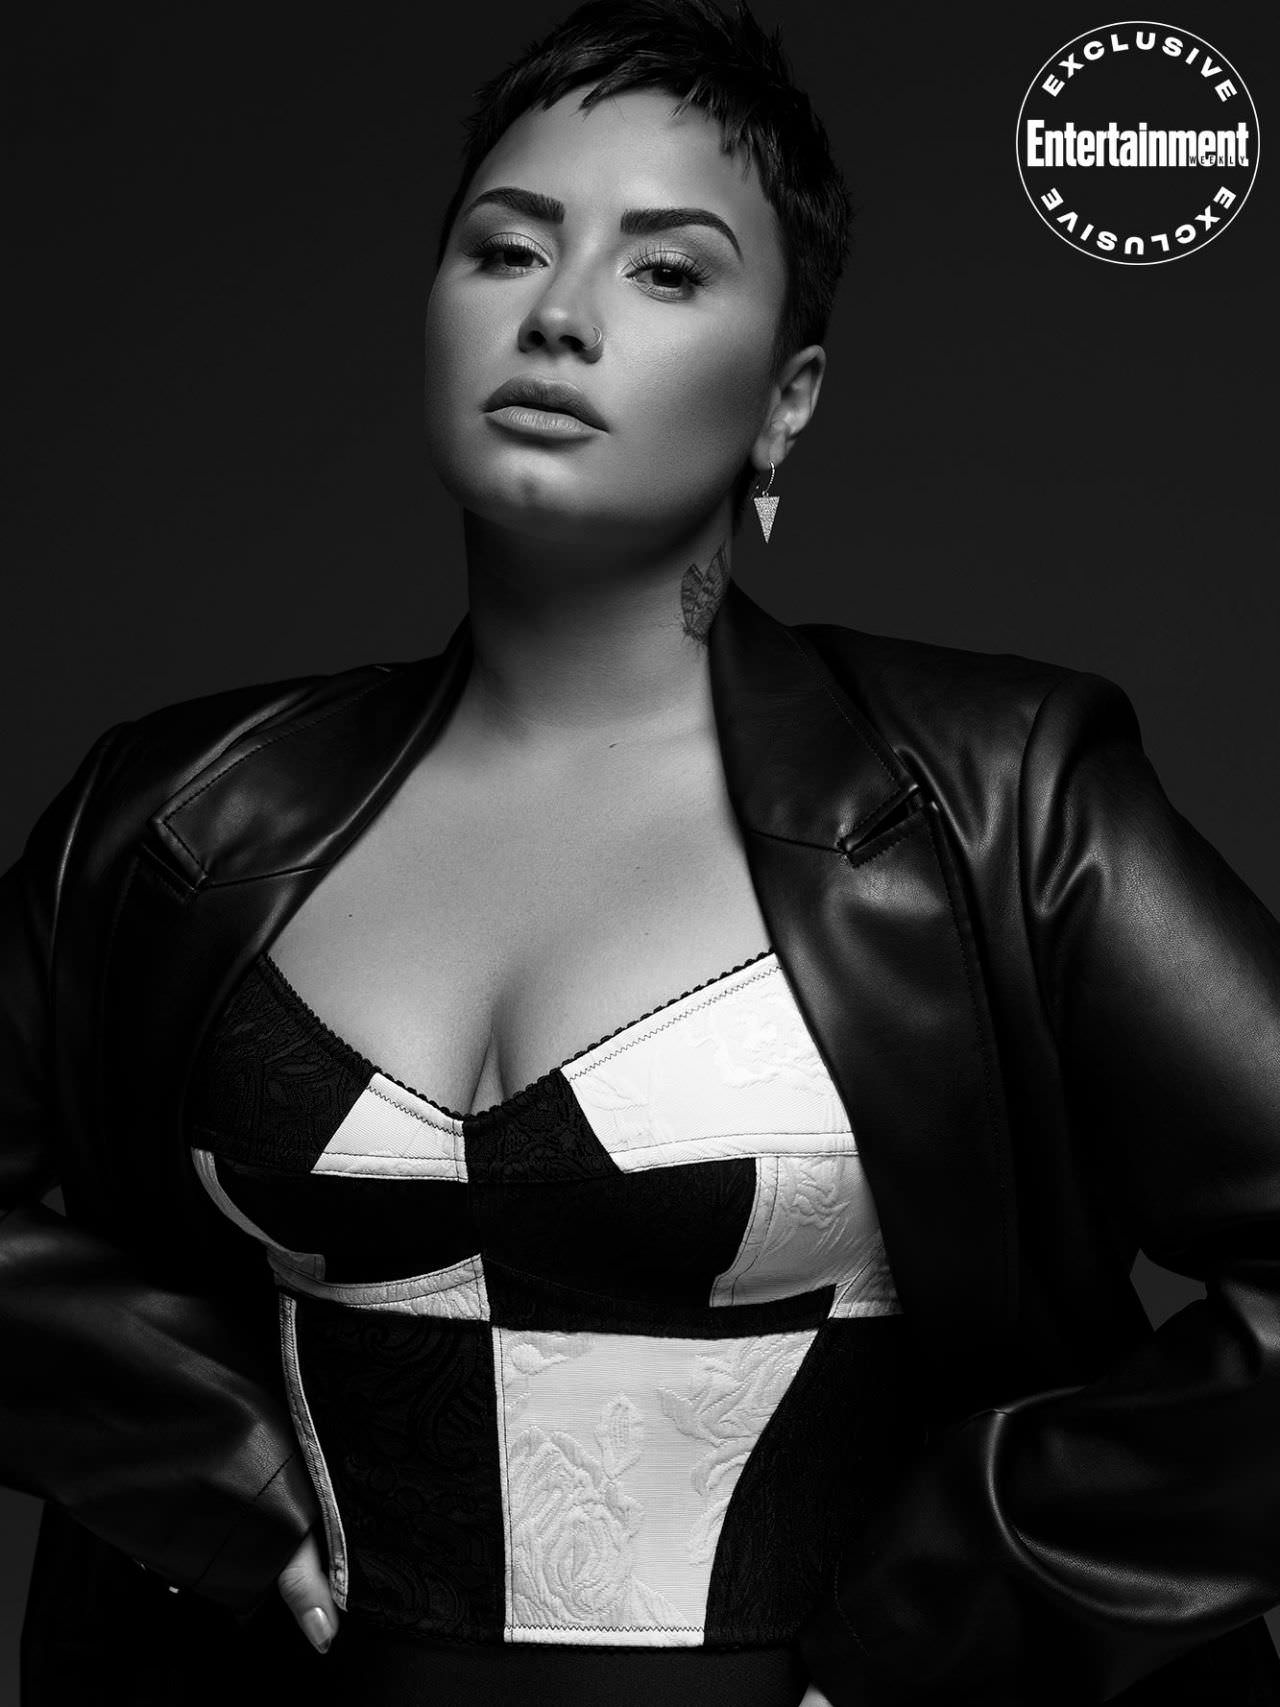 Demi Lovato Posing for Entertainment Weekly March 2021